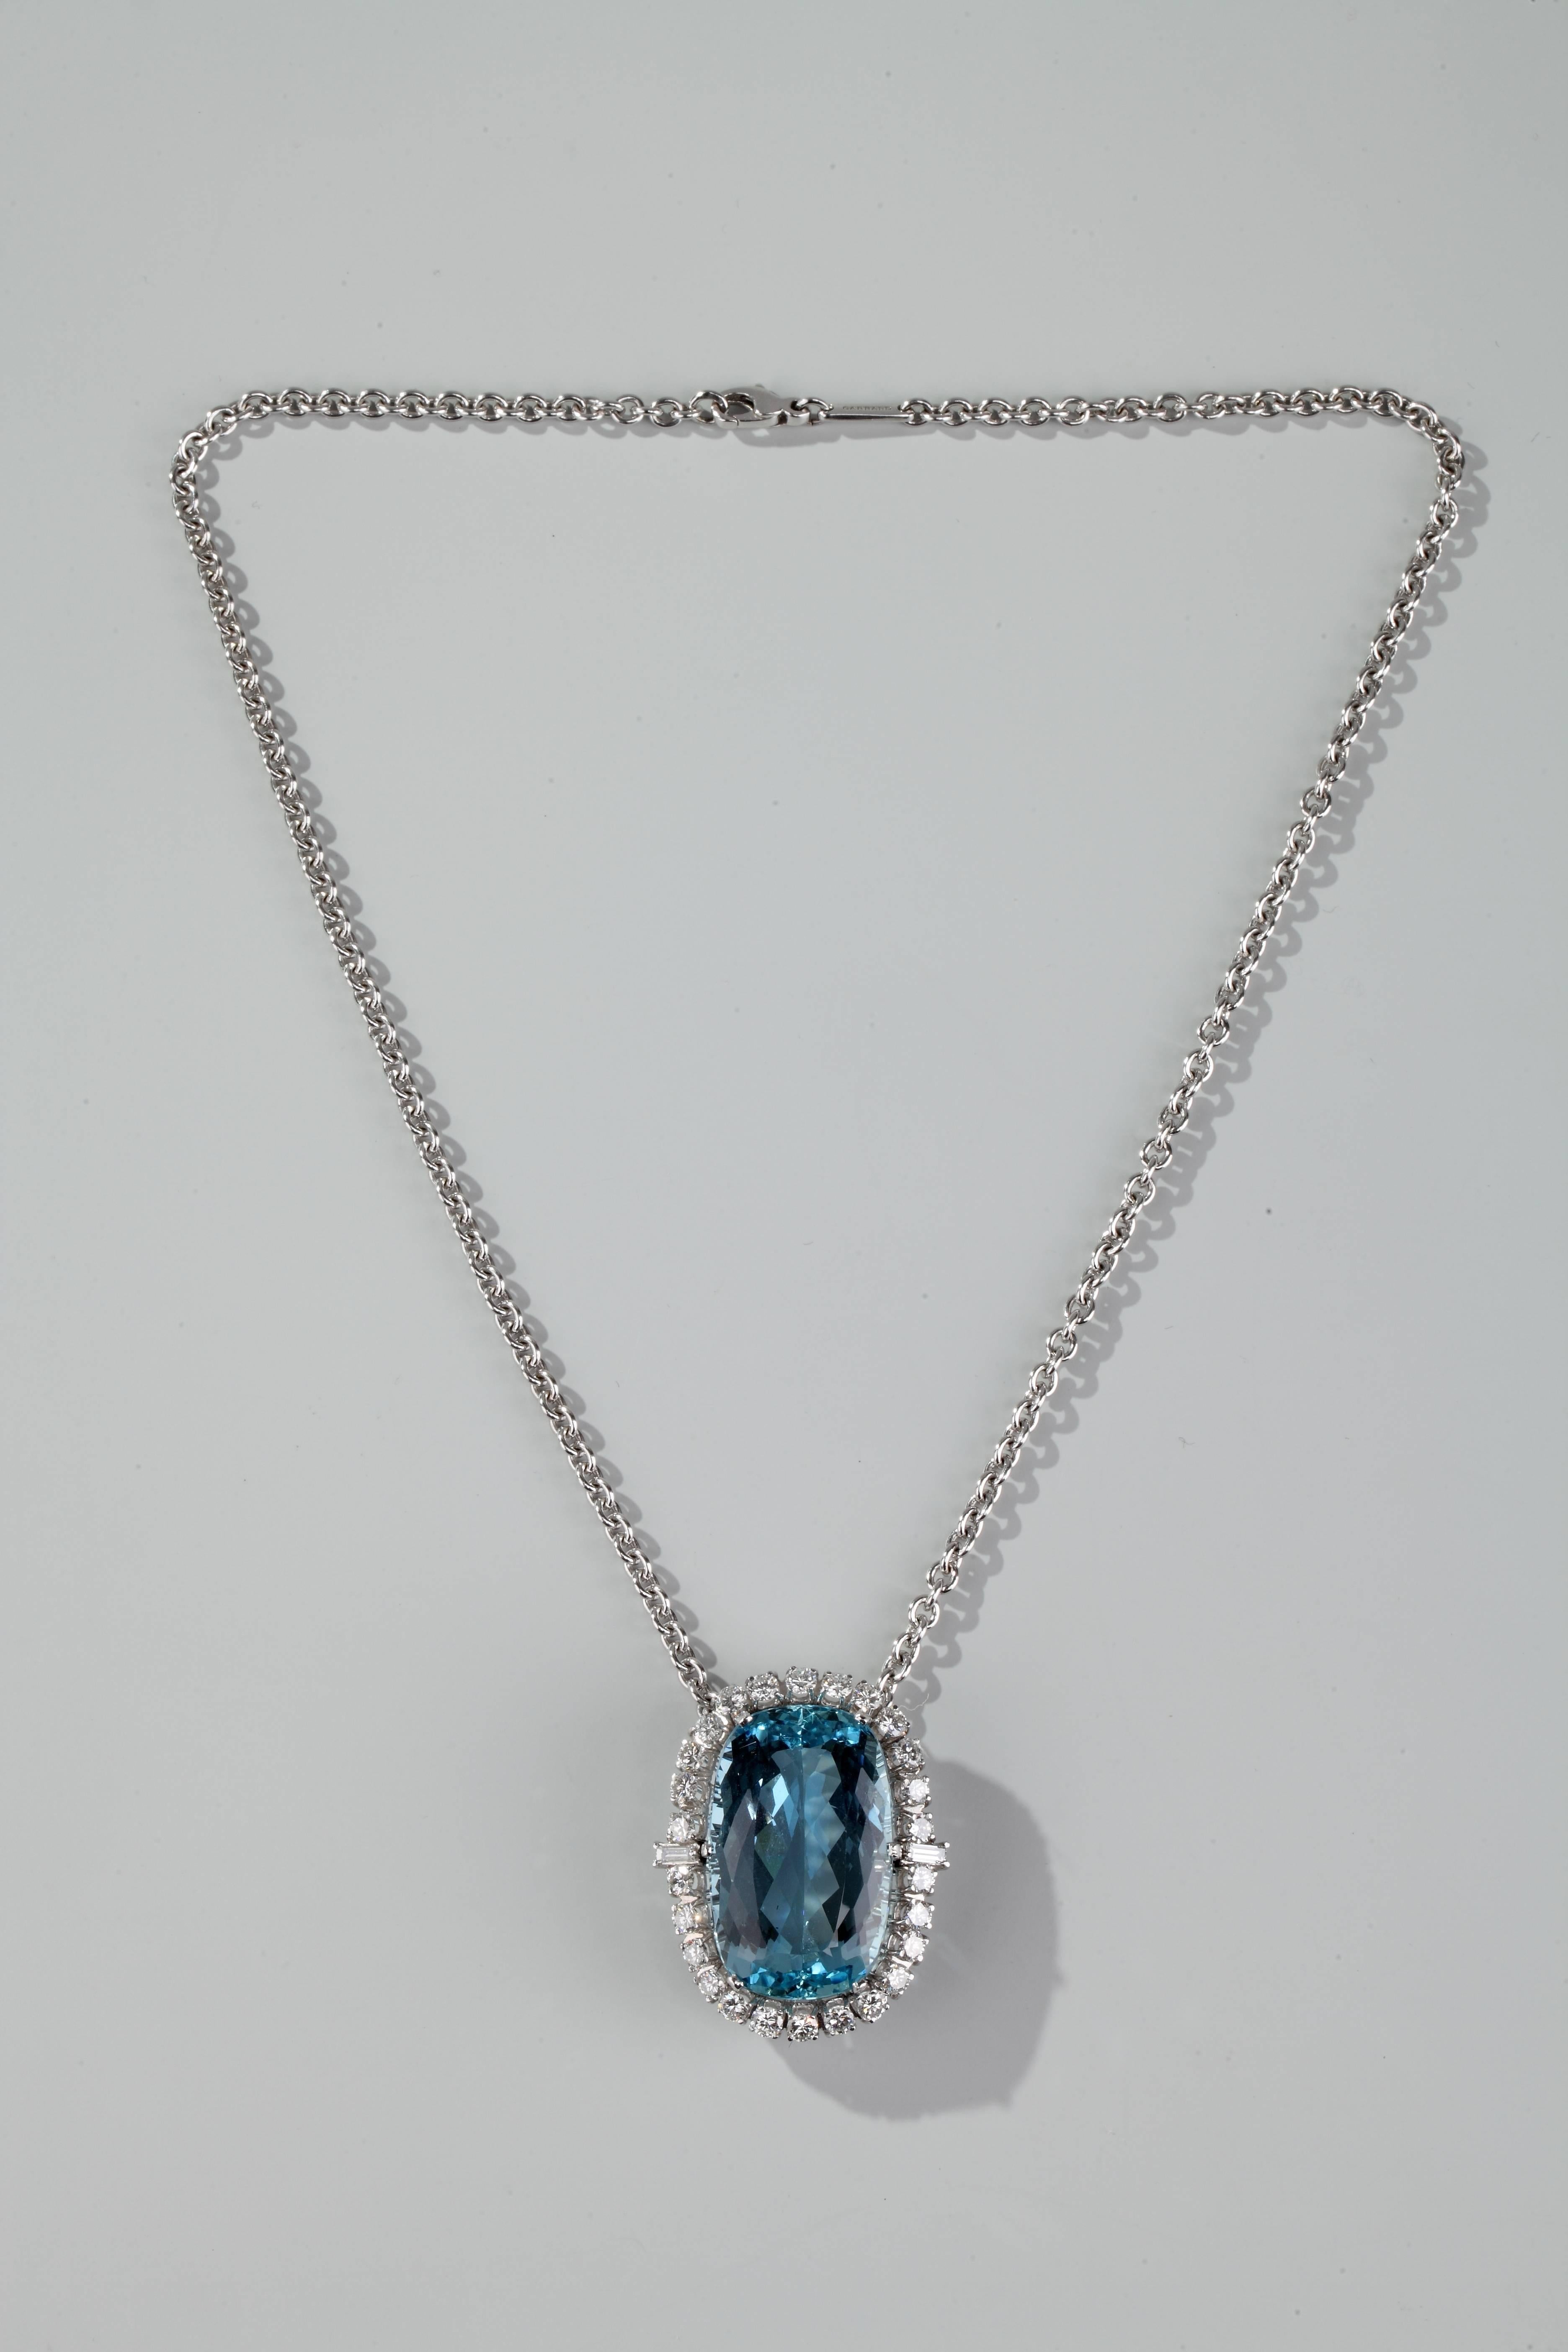 A nice and large cushion shape aquamarine weighing around 40 carats surrounded with brillant and baguette cut diamonds, mounted in 18k gold, accompanied with an 18k gold chain signed Garrard.
Weigh of diamonds : 5.5 carat.
Lenght of the chain : 45 cm